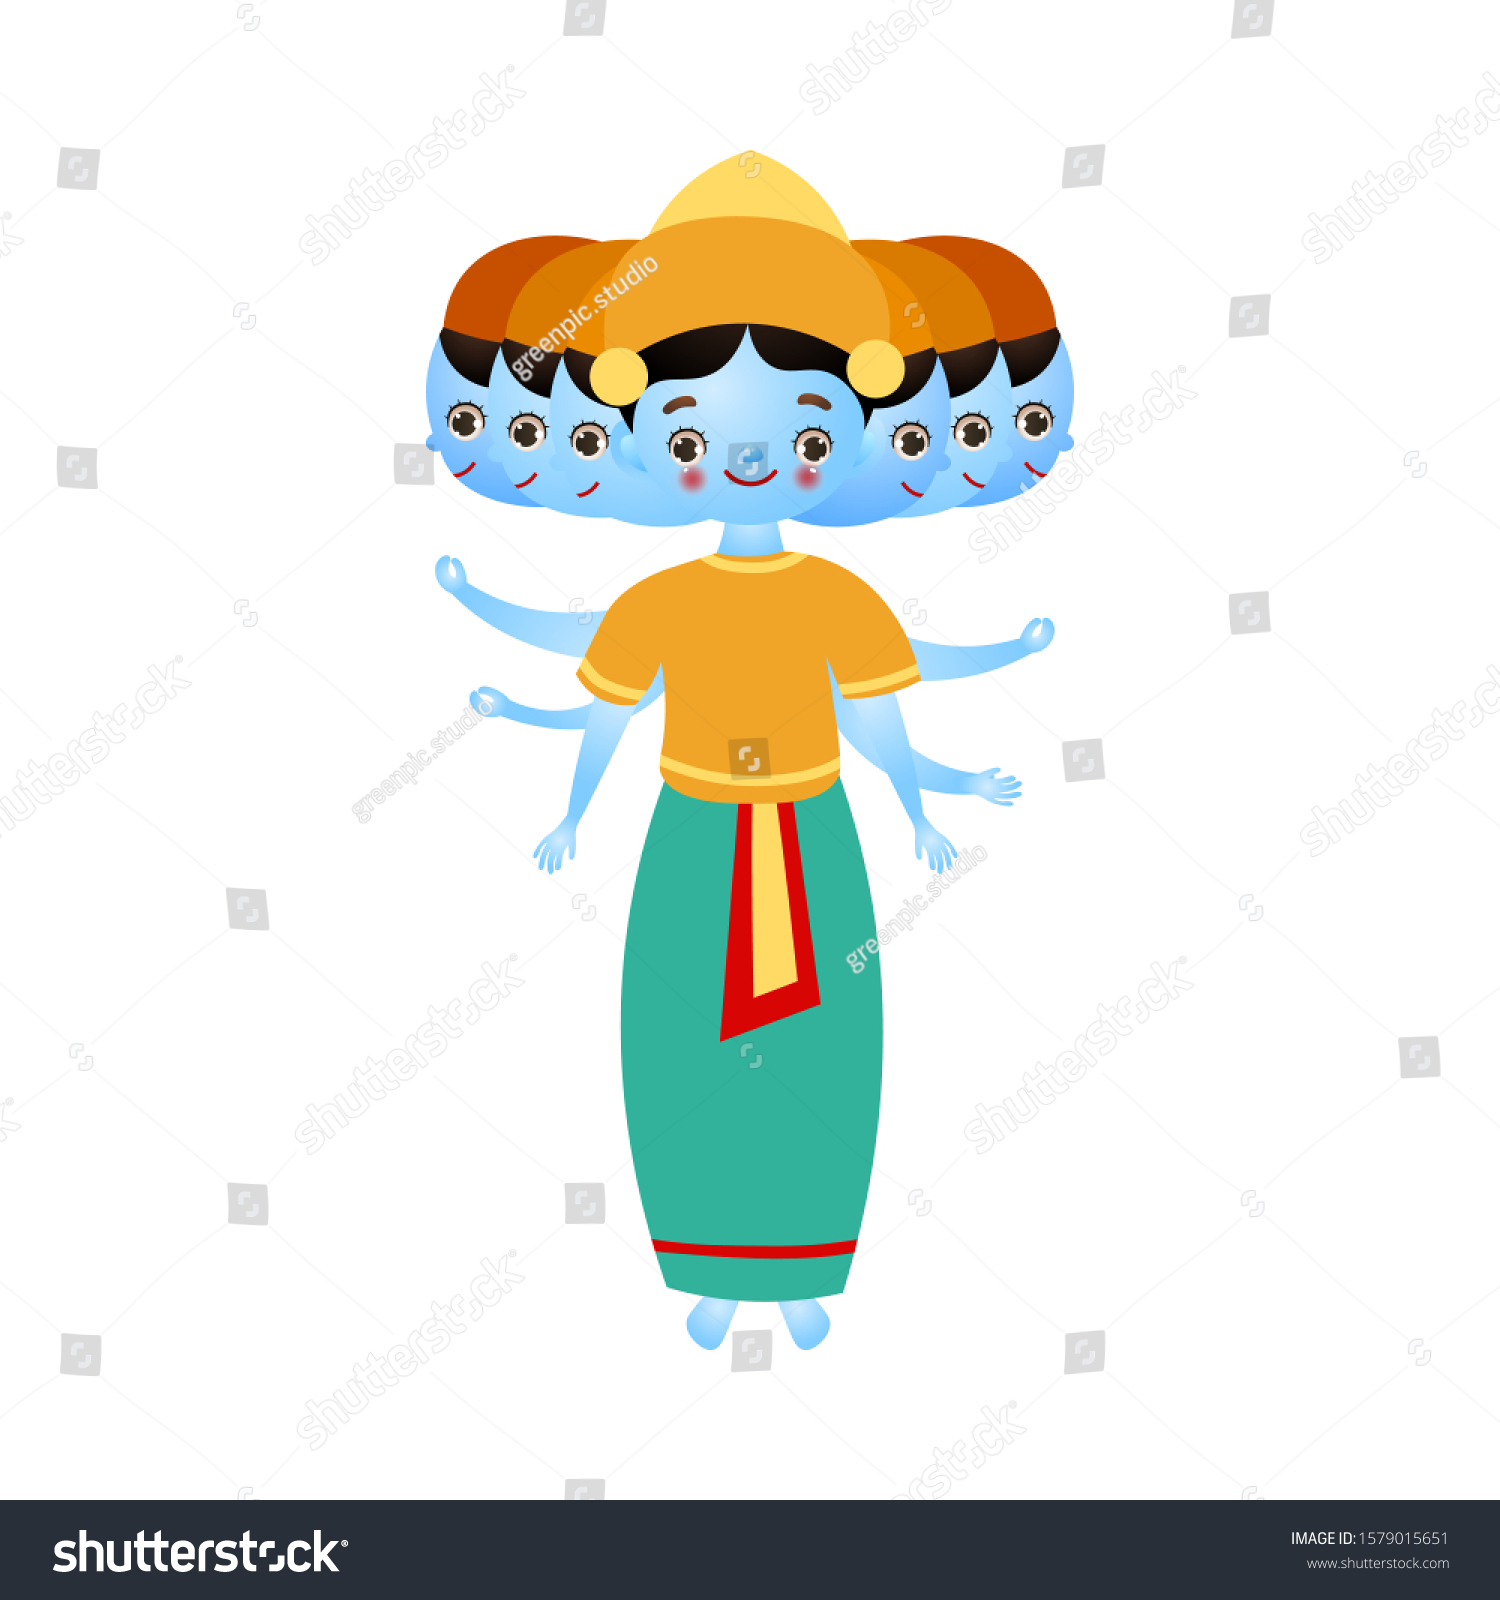 SVG of Hindu god with three heads in traditional clothing vector illustration svg